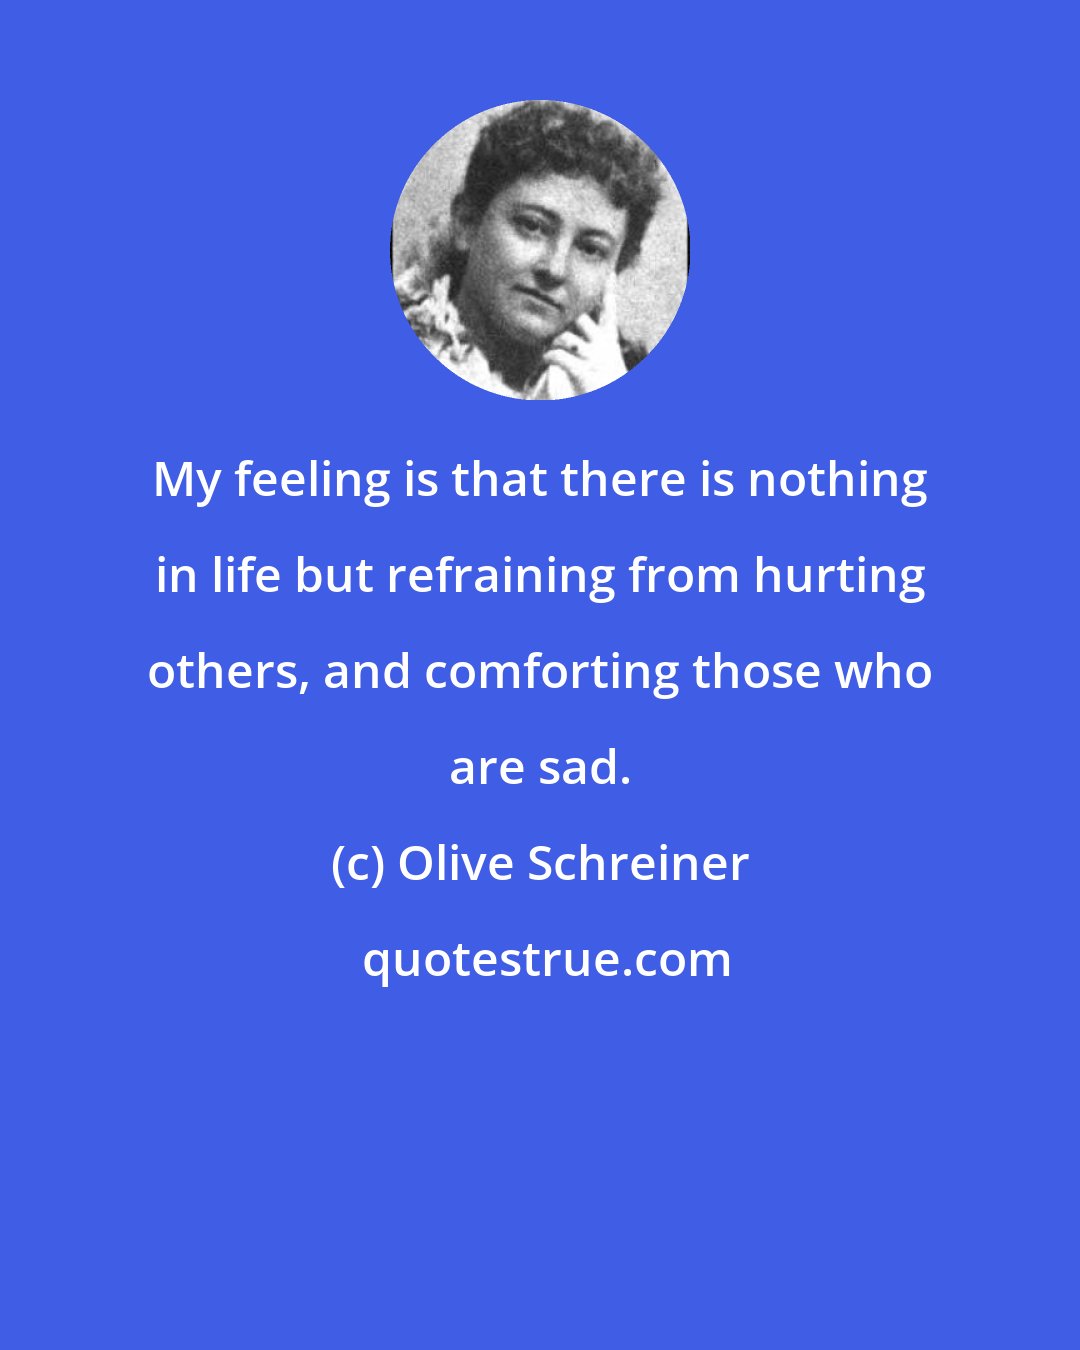 Olive Schreiner: My feeling is that there is nothing in life but refraining from hurting others, and comforting those who are sad.